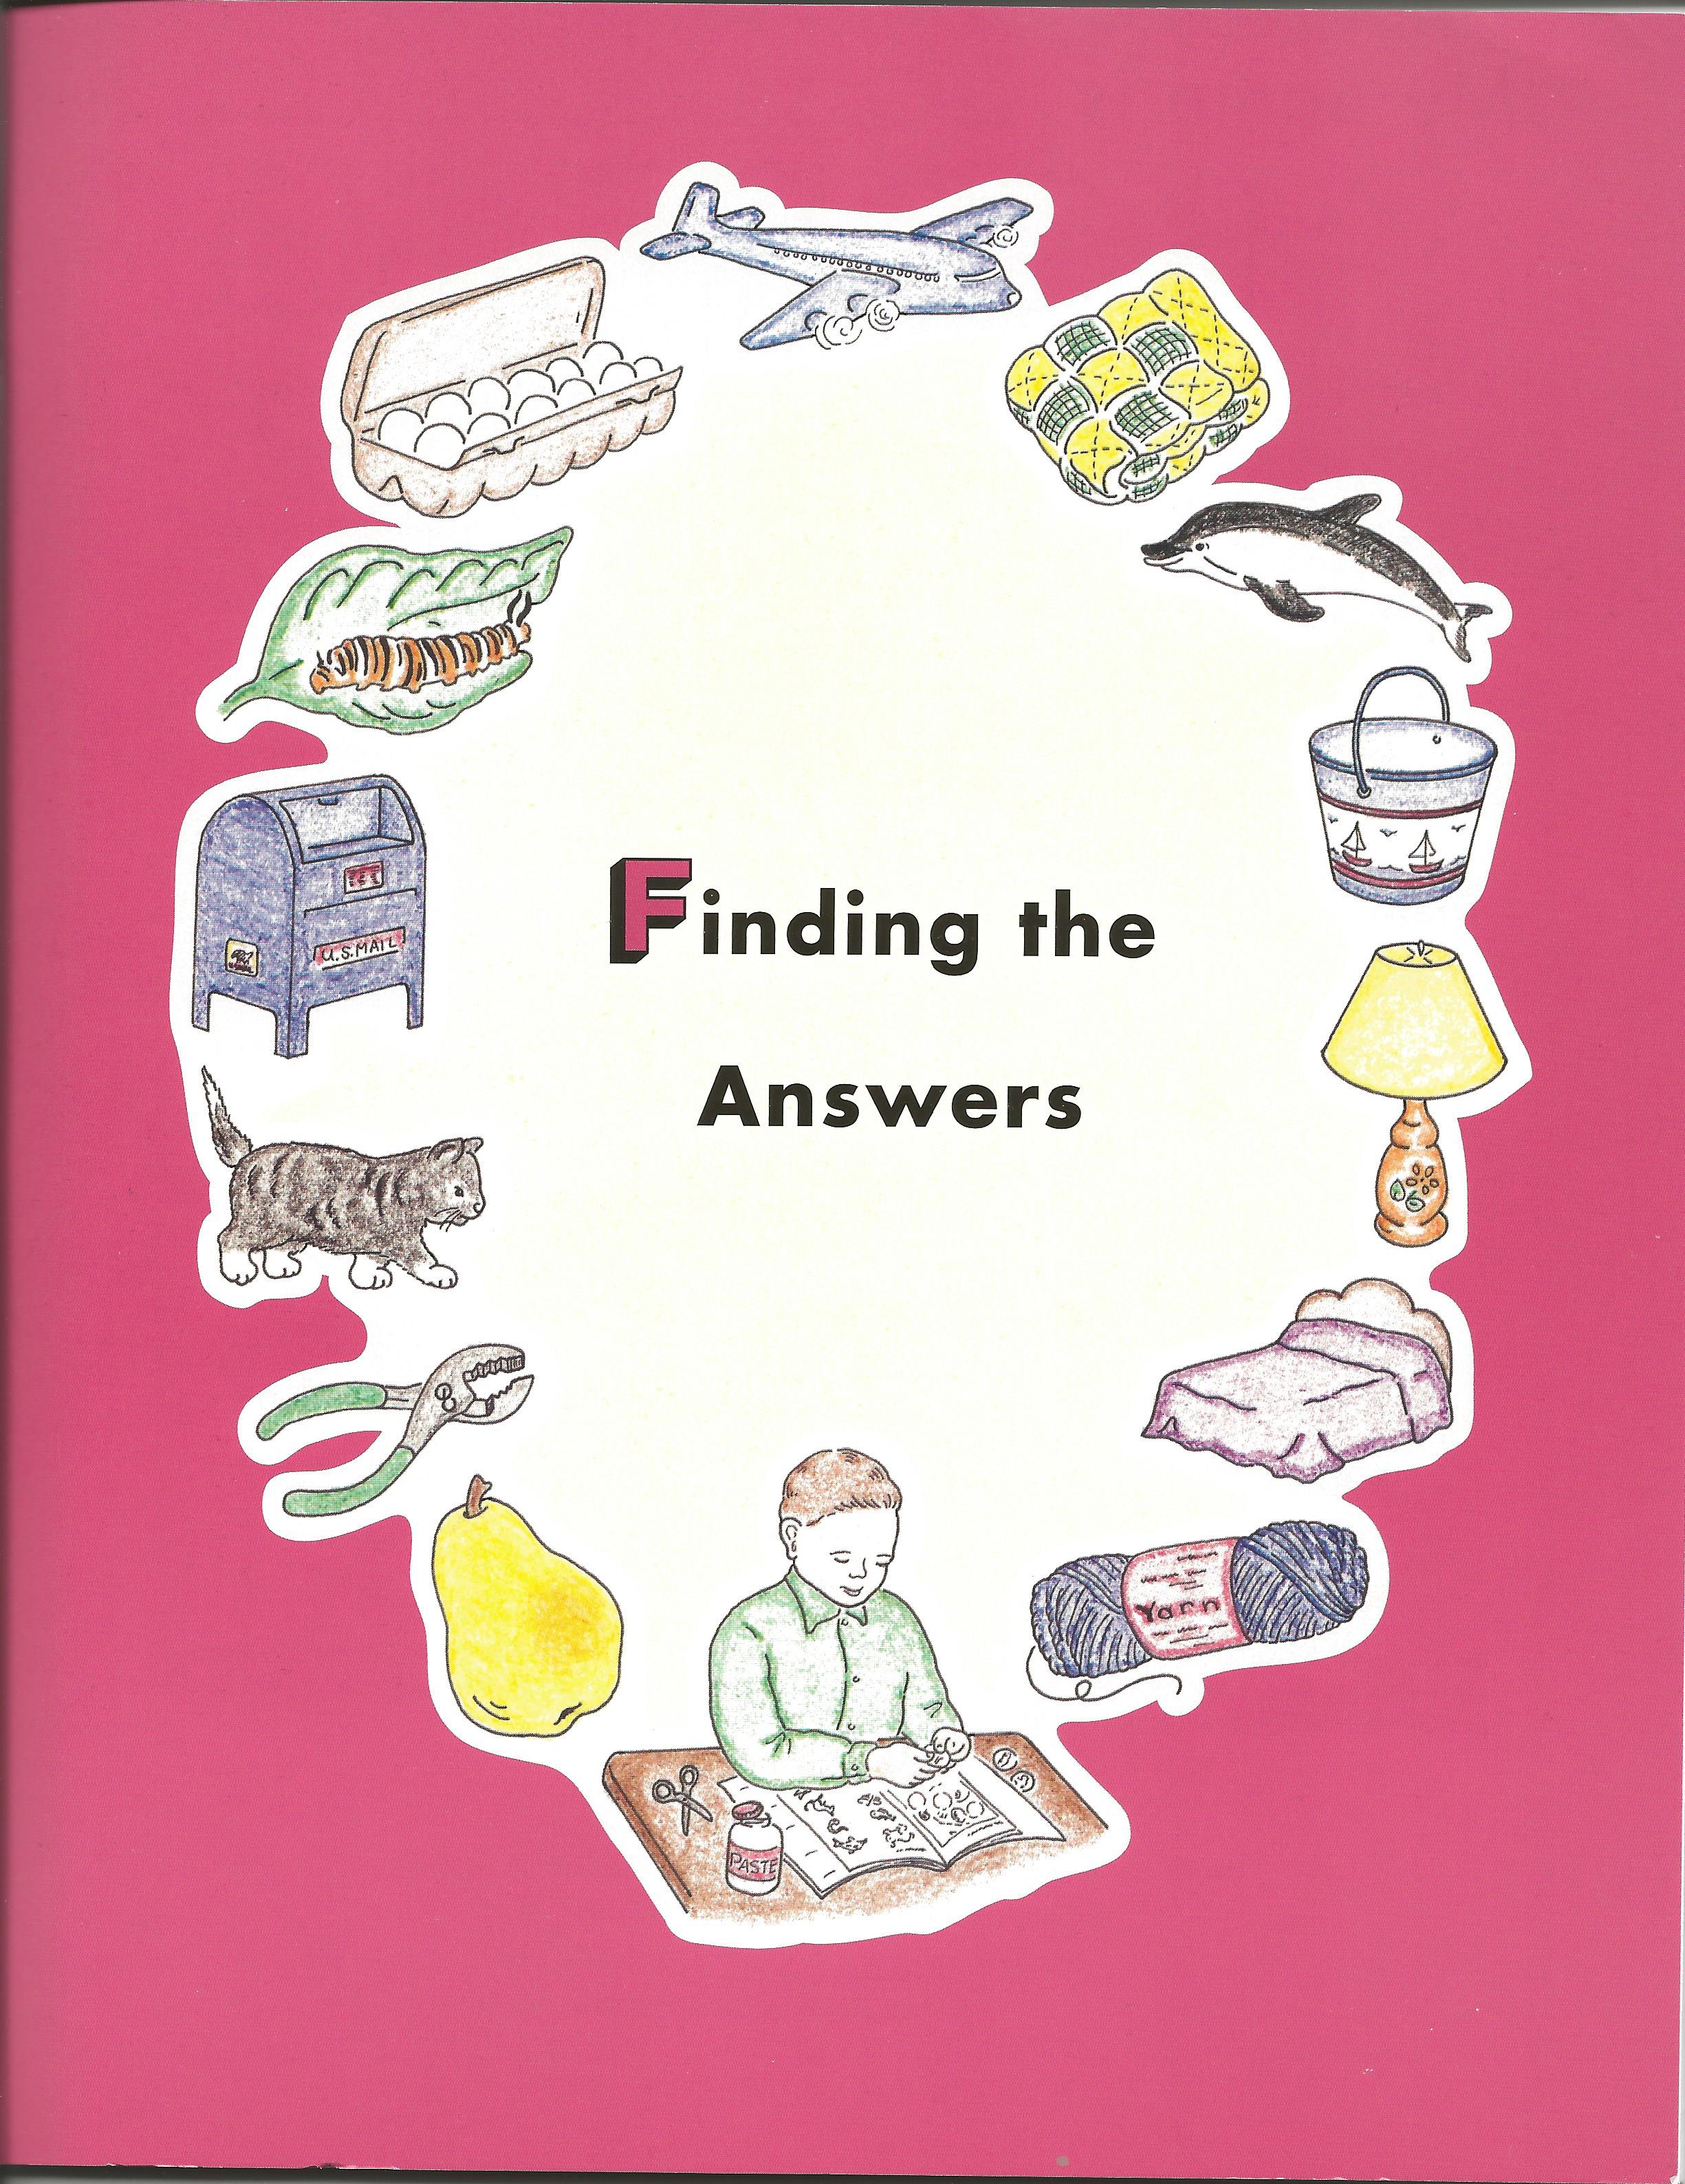 FINDING THE ANSWERS